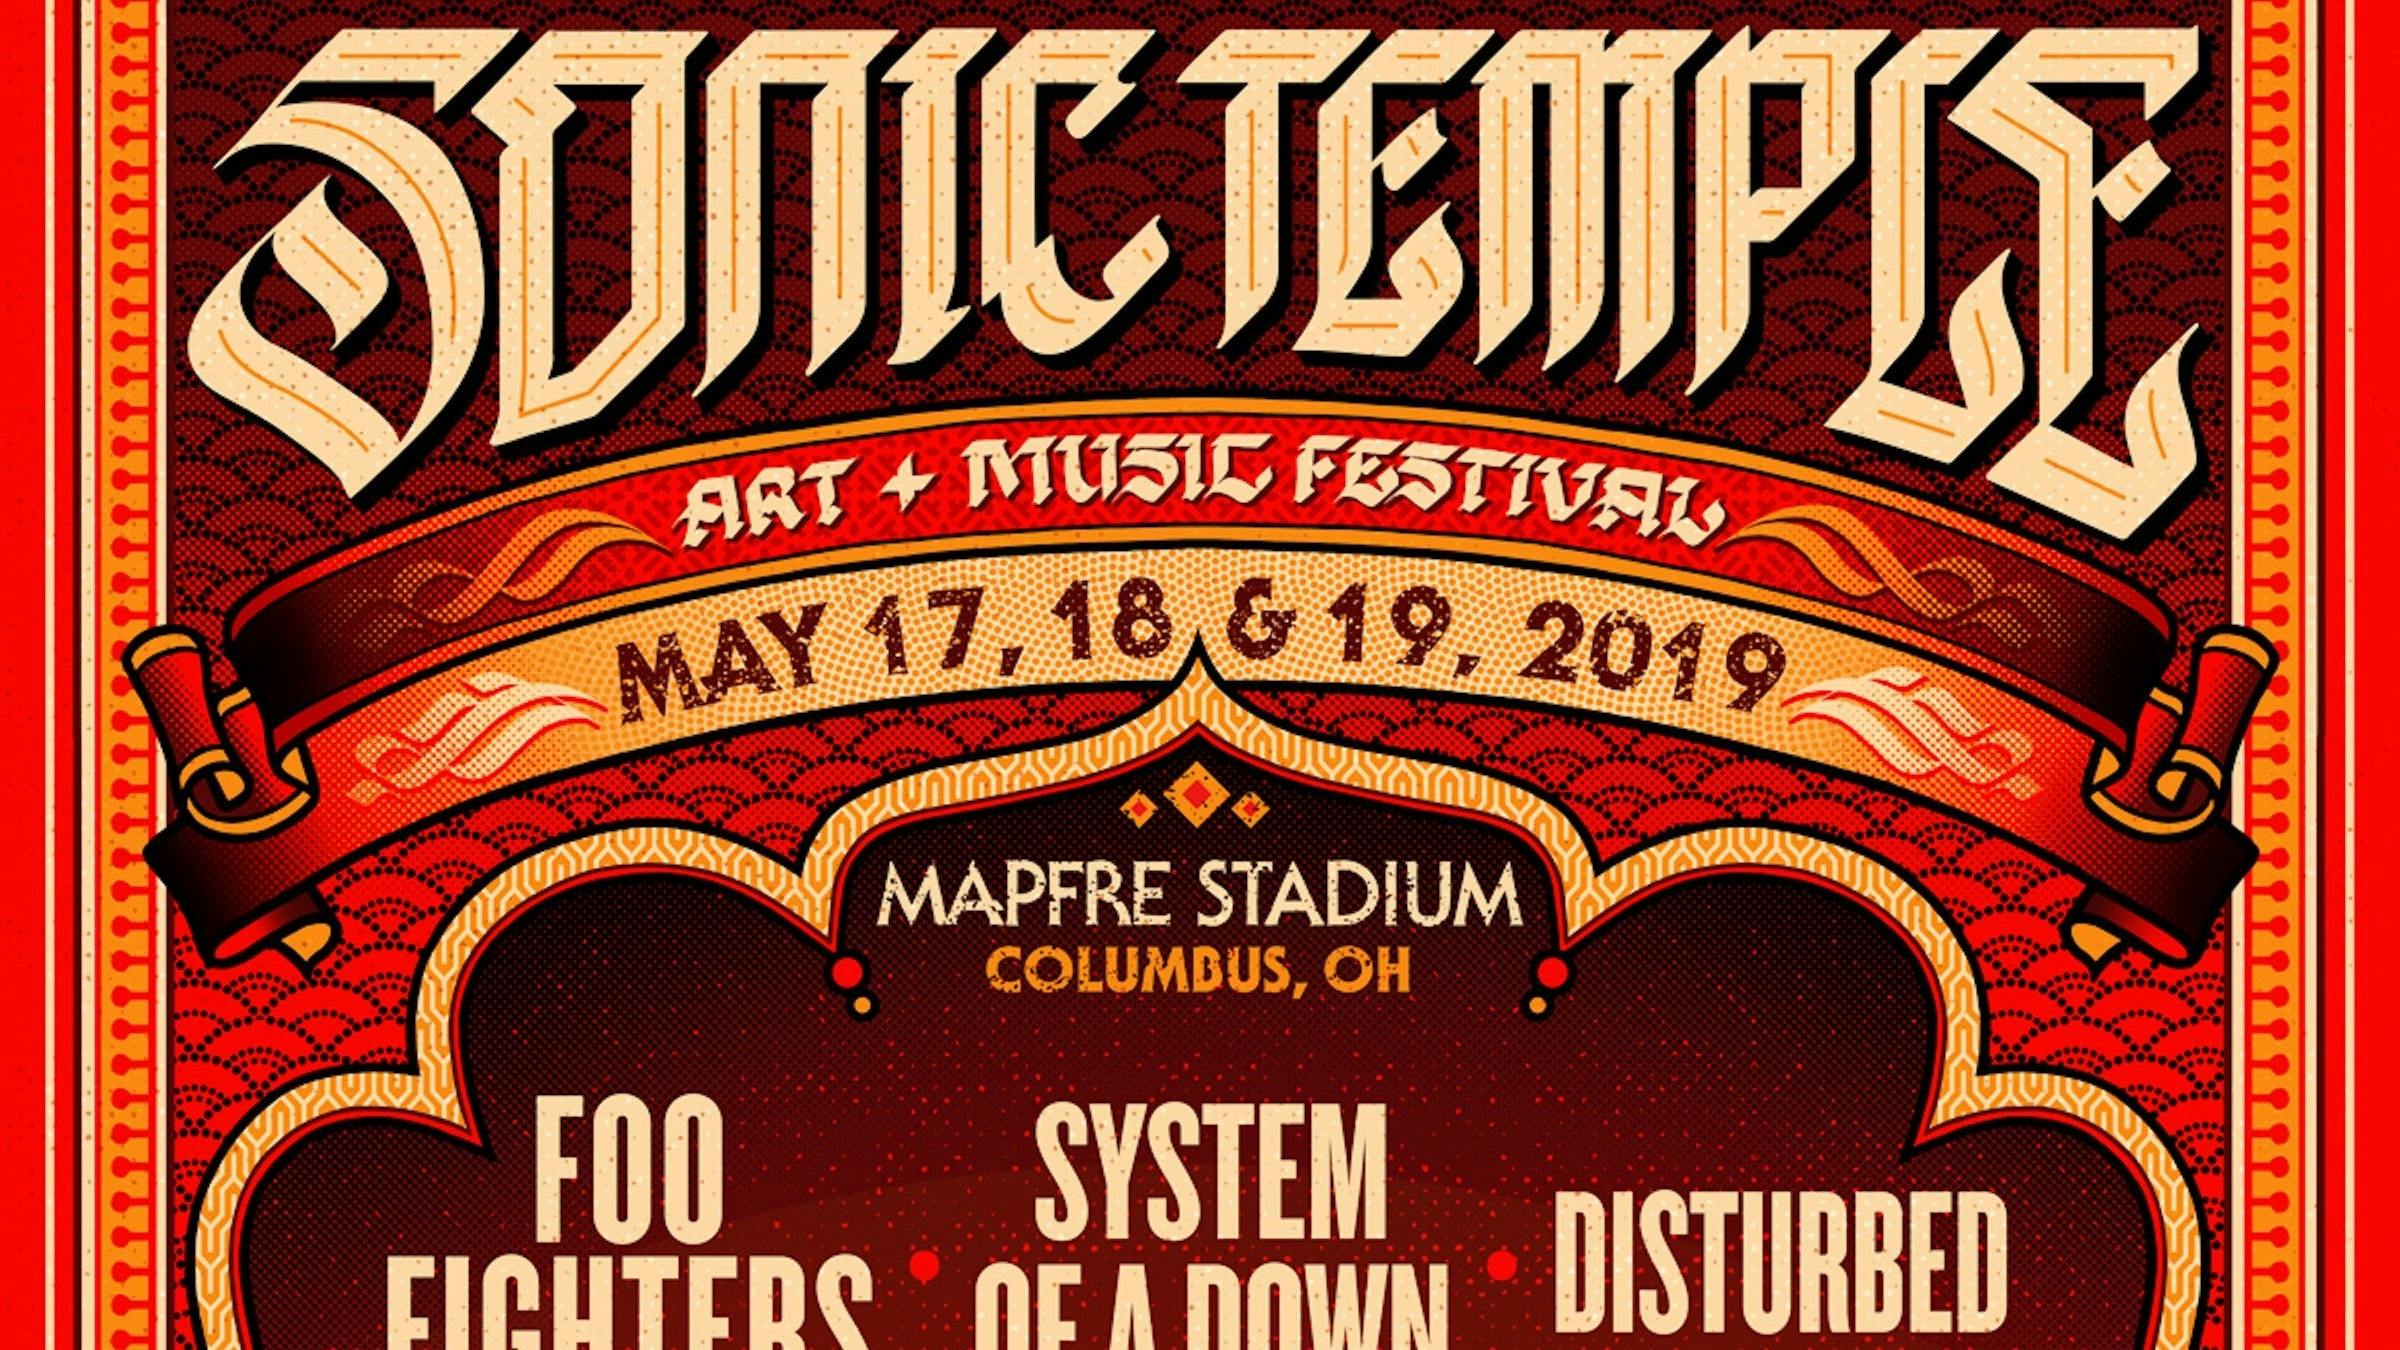 Foo Fighters, System Of A Down, And Disturbed To Headline First-Ever Sonic Temple Art + Music Festival